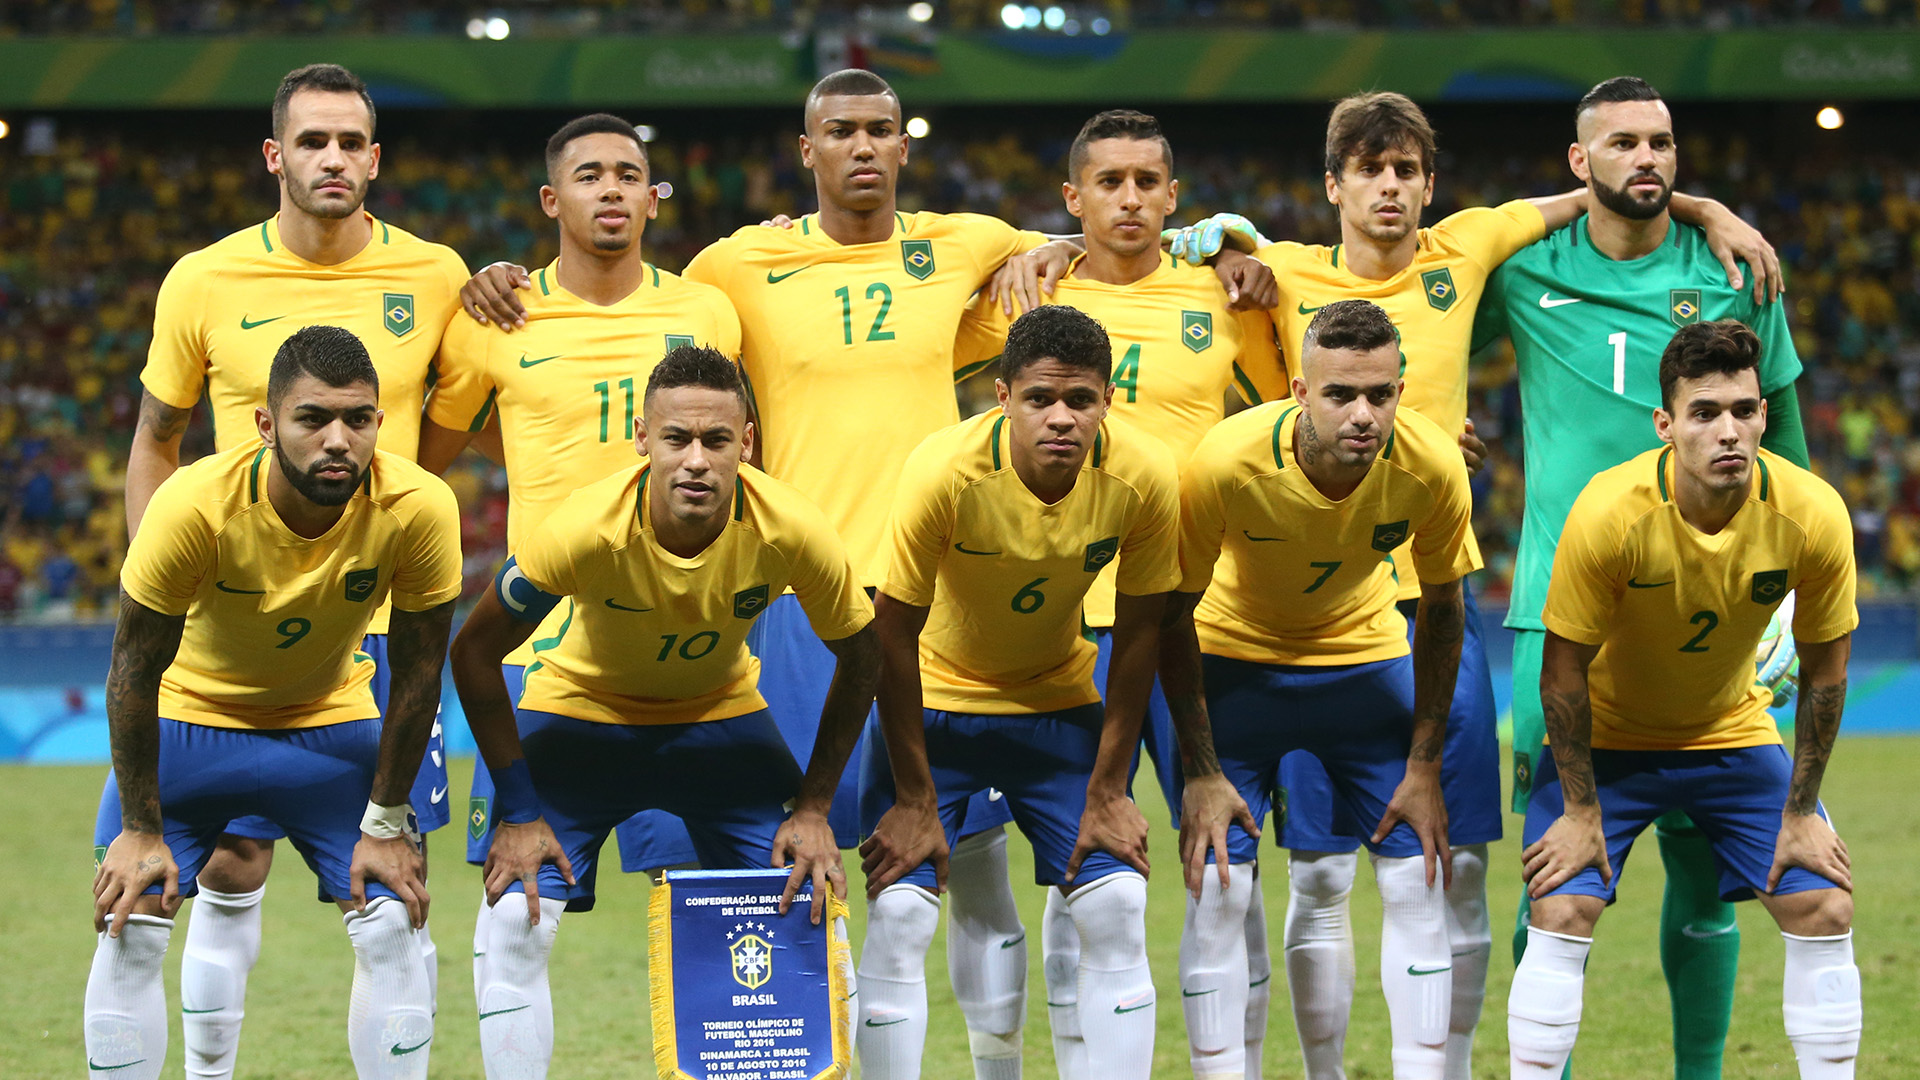 Where is the Brazil 2016 Olympics gold medal winning team now?